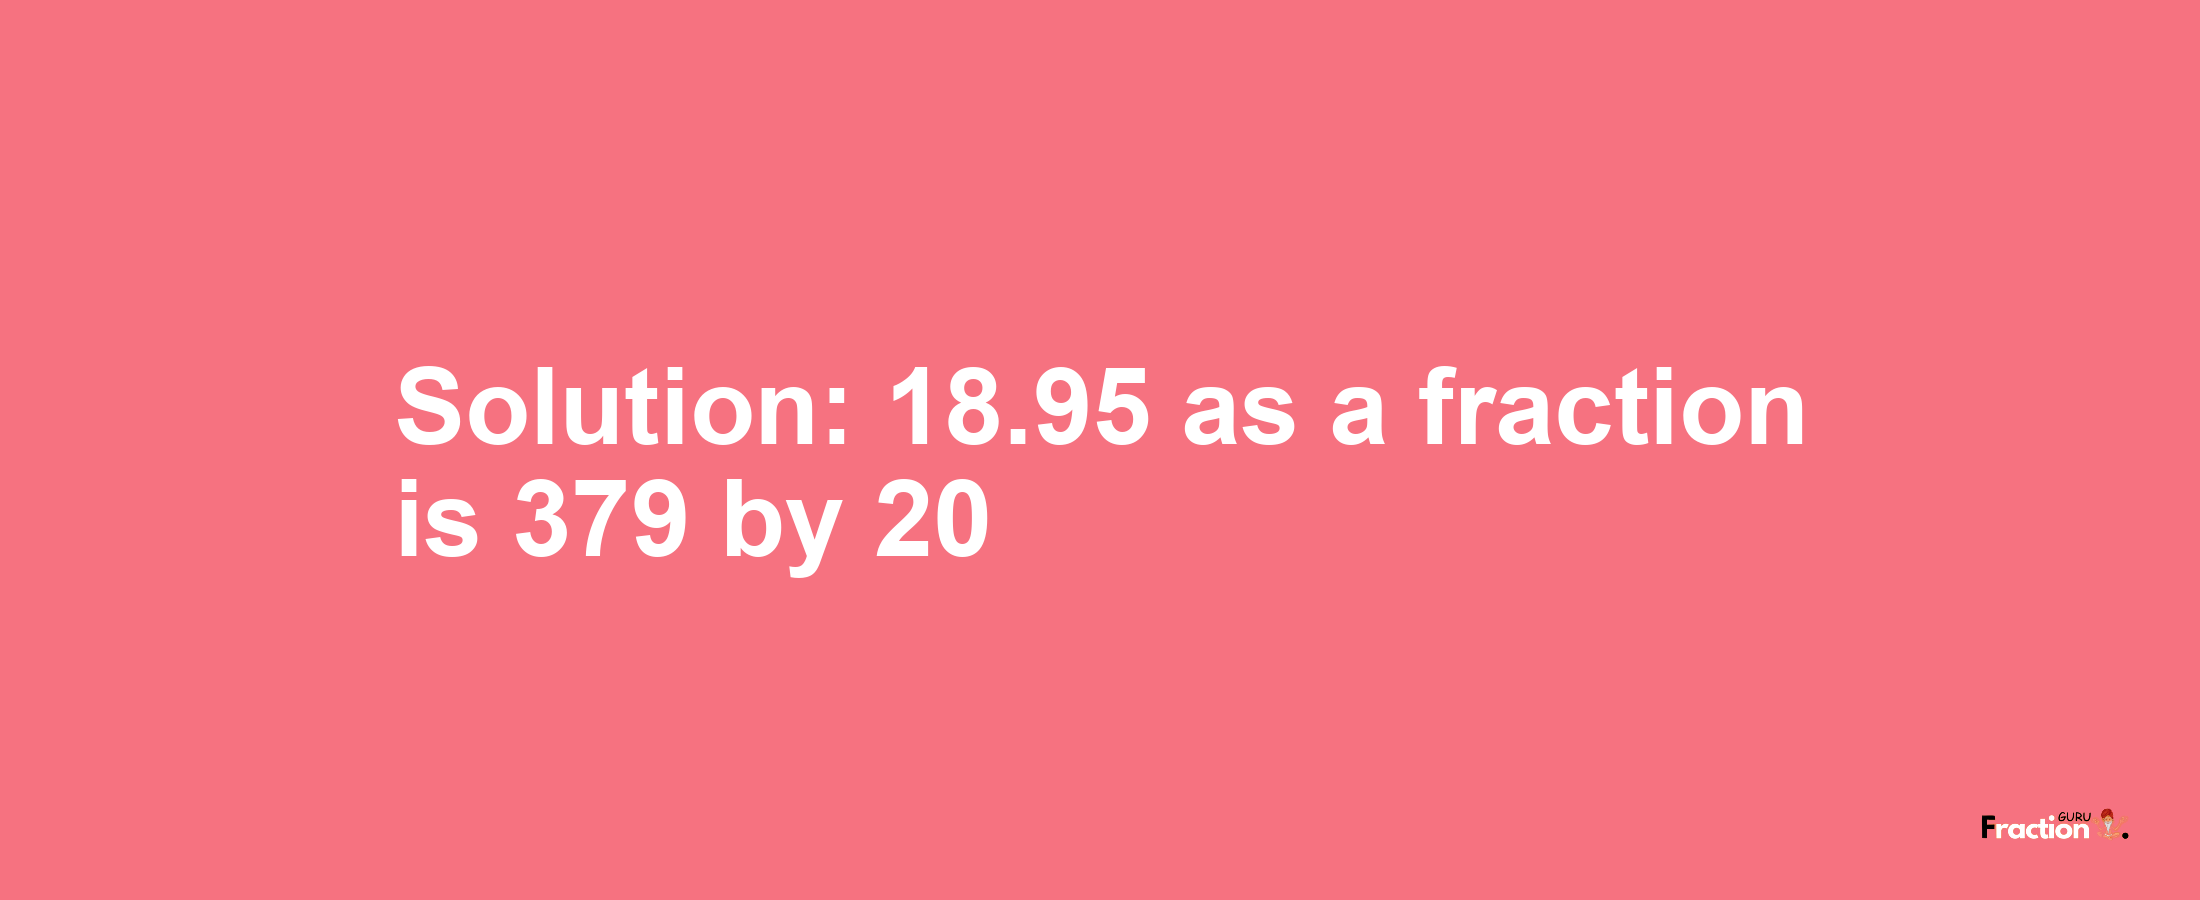 Solution:18.95 as a fraction is 379/20